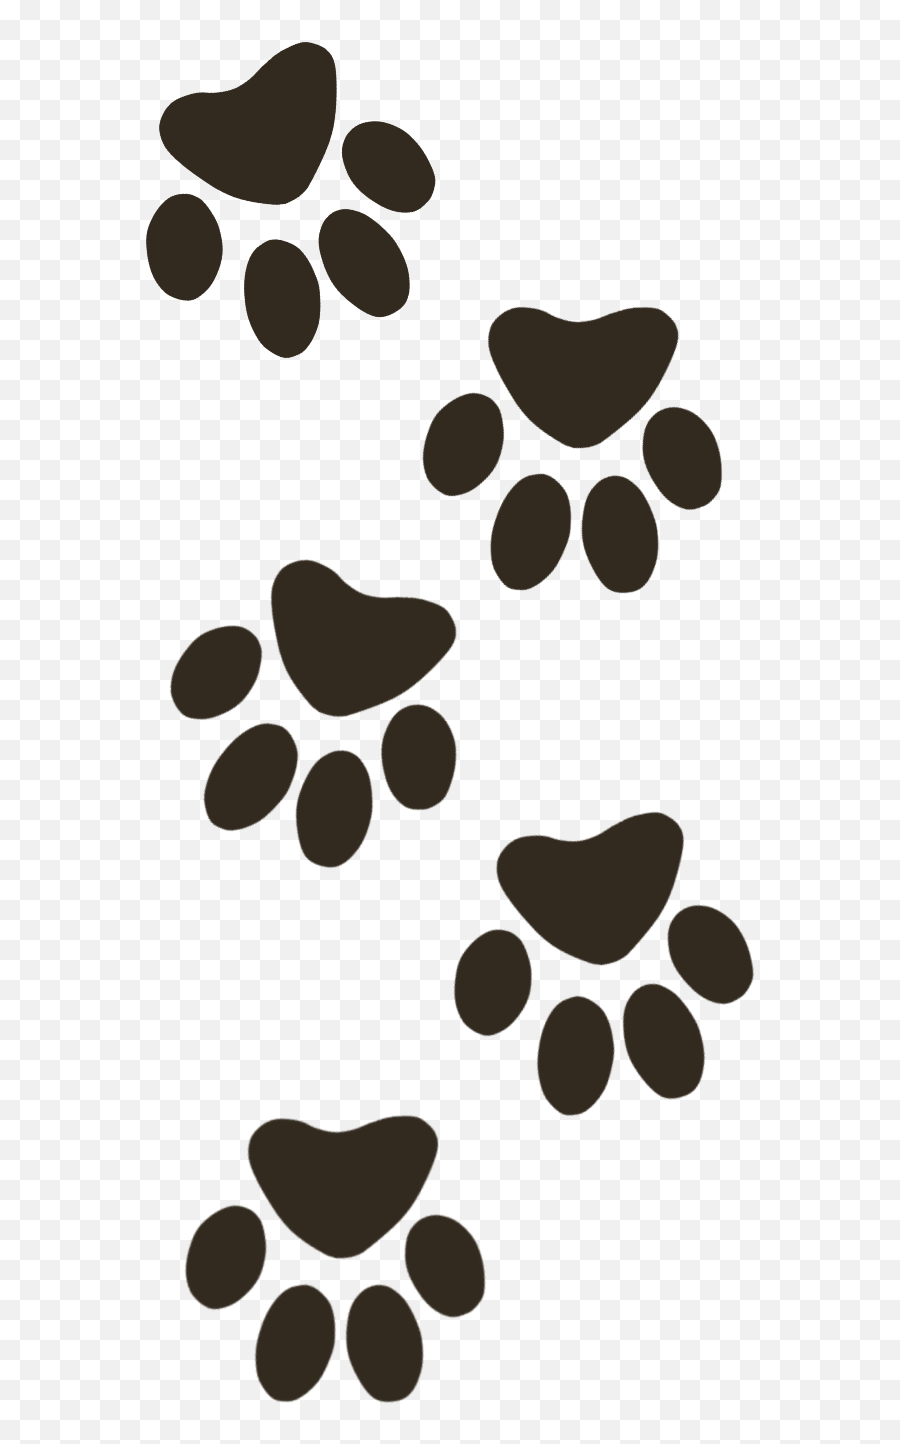 Download 4 Paws - Paw Png Image With No Background Pngkeycom Paws,Paw Png